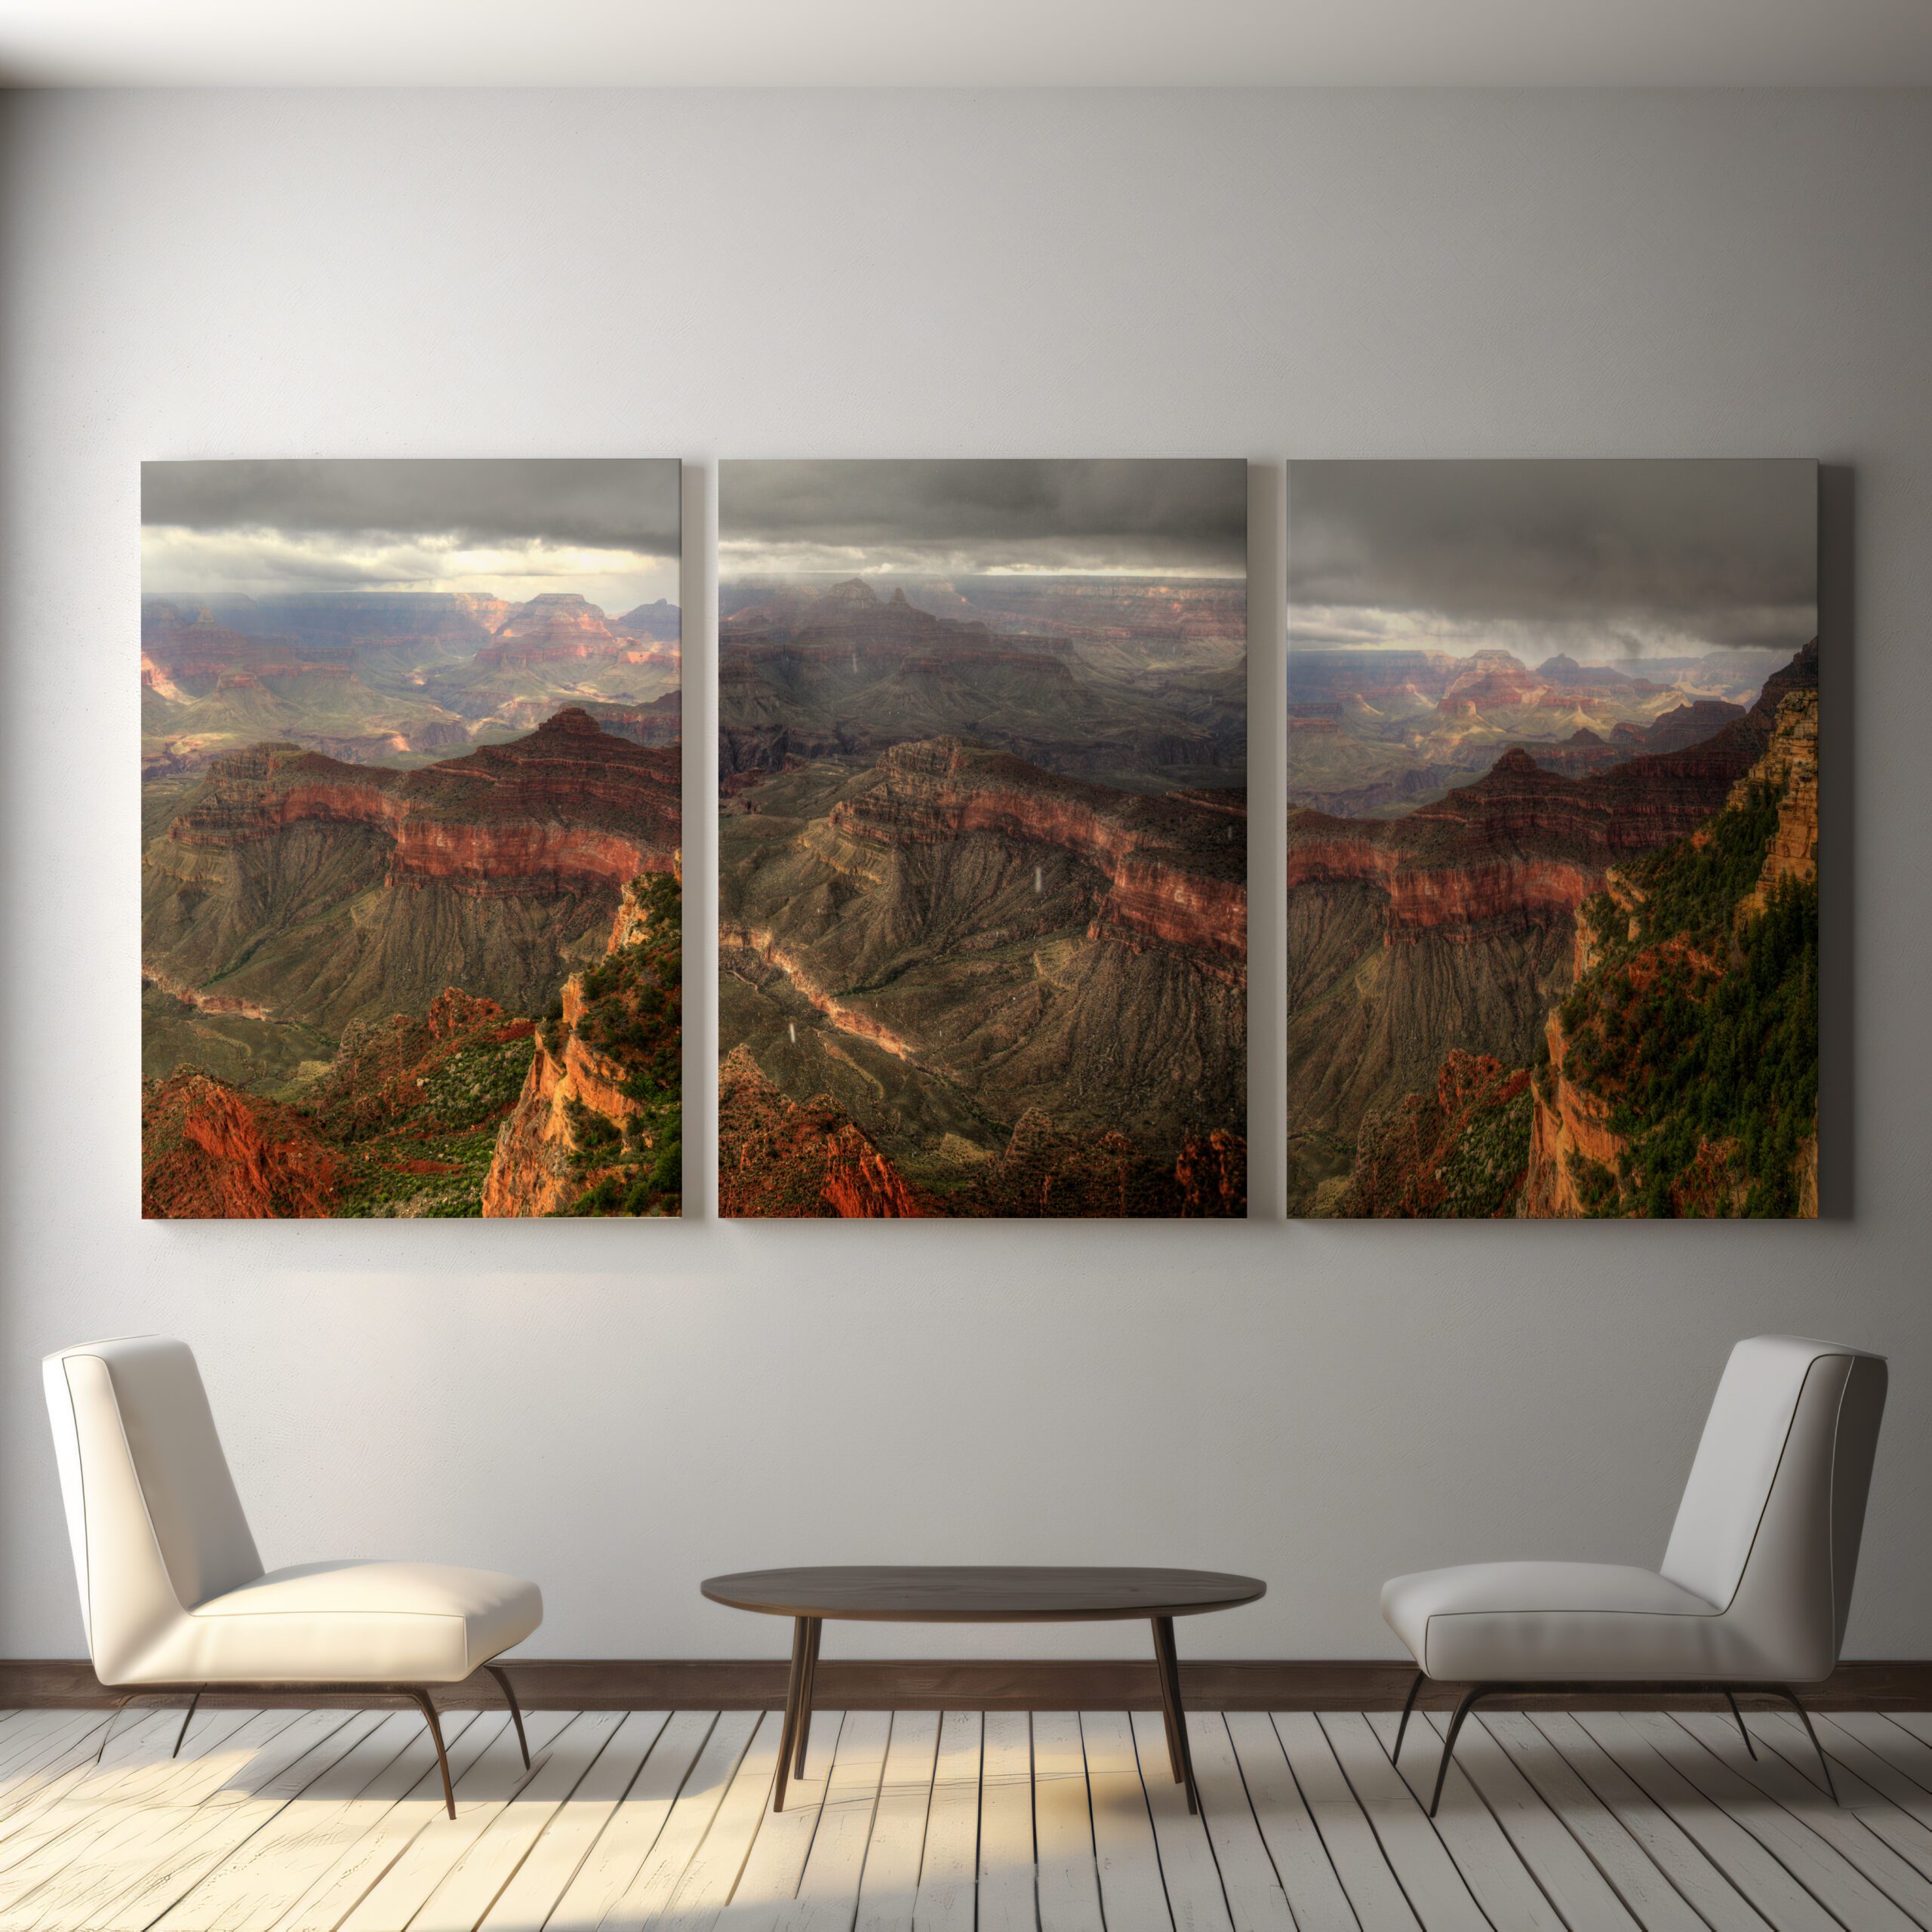 il-bordura home decor 3 grand canyon landscapes canvas with 2 armchairs and coffee table